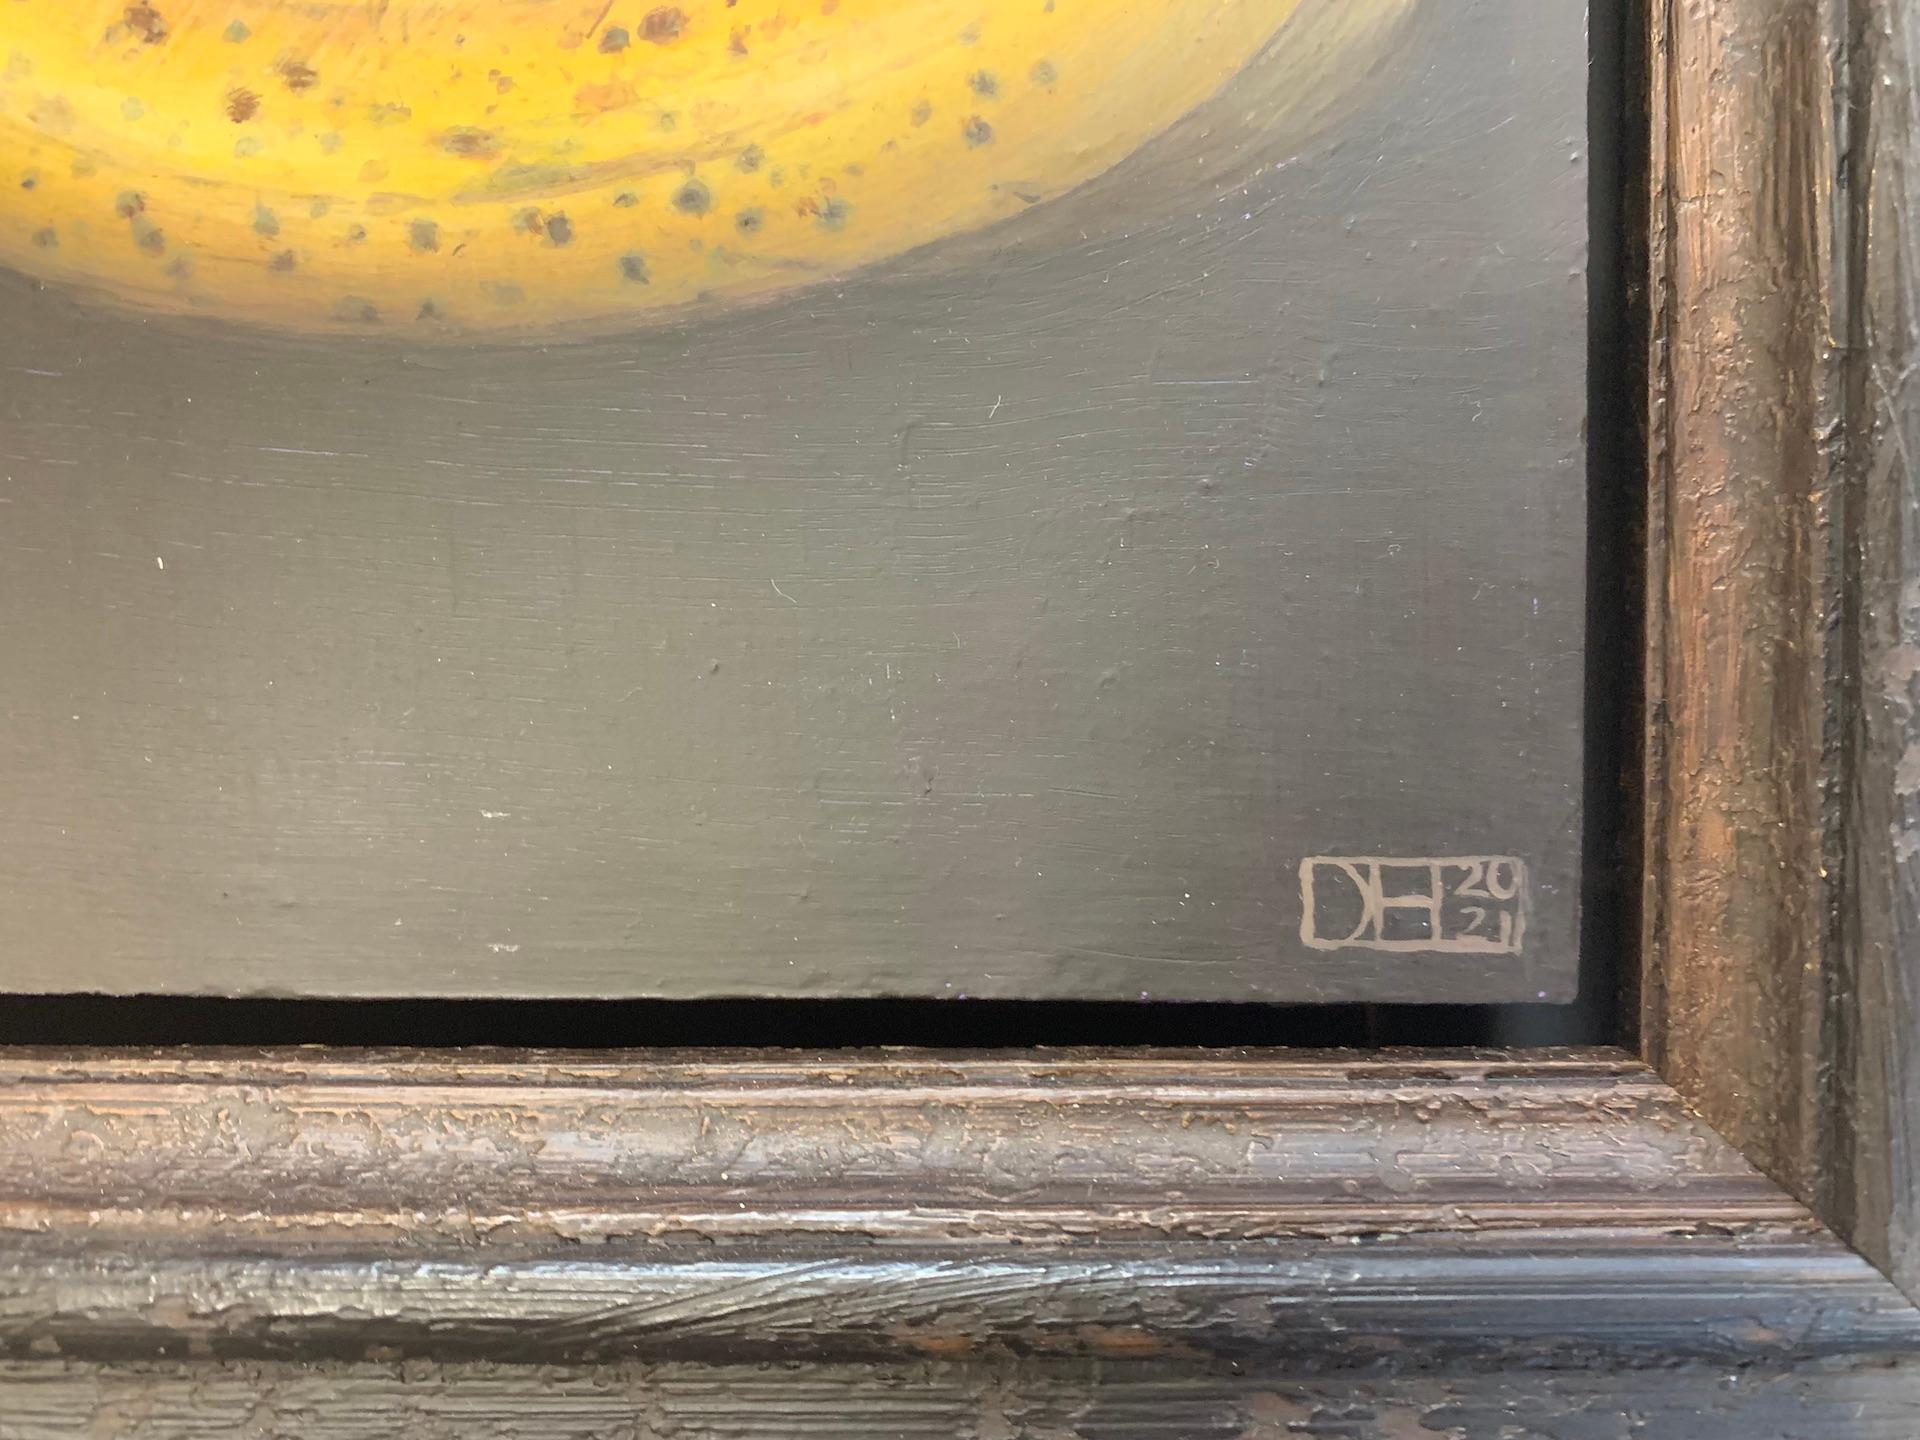 Yellow Banana is a framed original signed oil painting on canvas by Dani Humberstone of a realistic still life of a yellow banana against a black background in a black layered frame.

Additional information:
Yellow Banana by Dani Humberstone